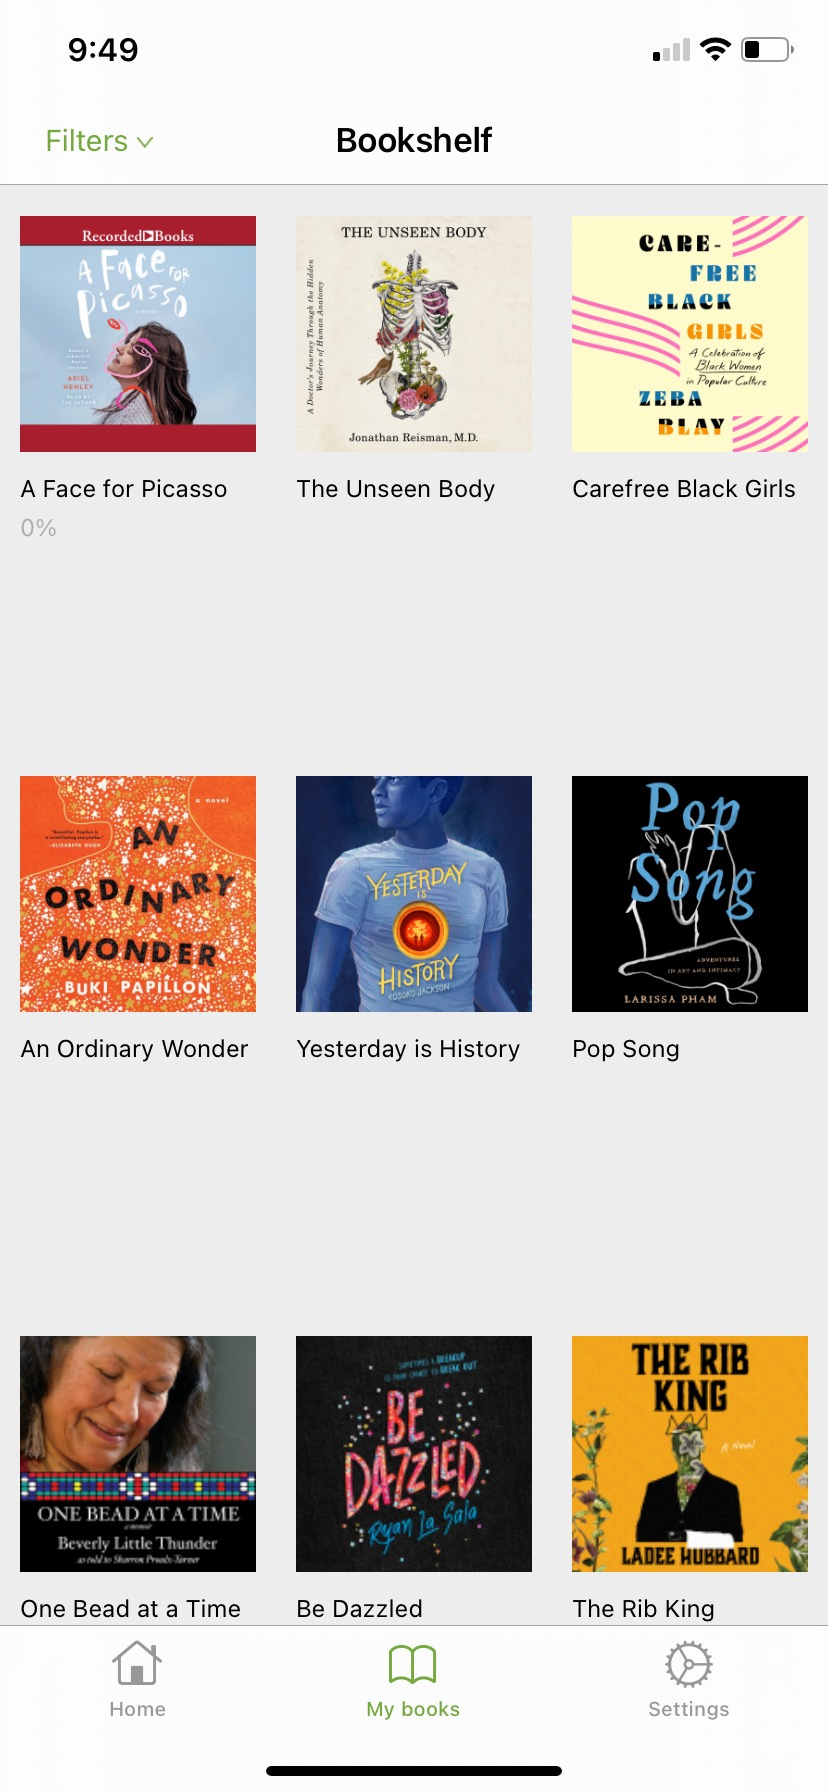 A screenshot of my NetGalley audiobook bookshelf, which shows small images of 9 audiobooks: A Face for Picasso, The Unseen Body, Care-Free Black Girls, My Ordinary Wonder, Yesterday Is History, Pop Song, One Bead at a Time, Be Dazzled, and The Rib King.